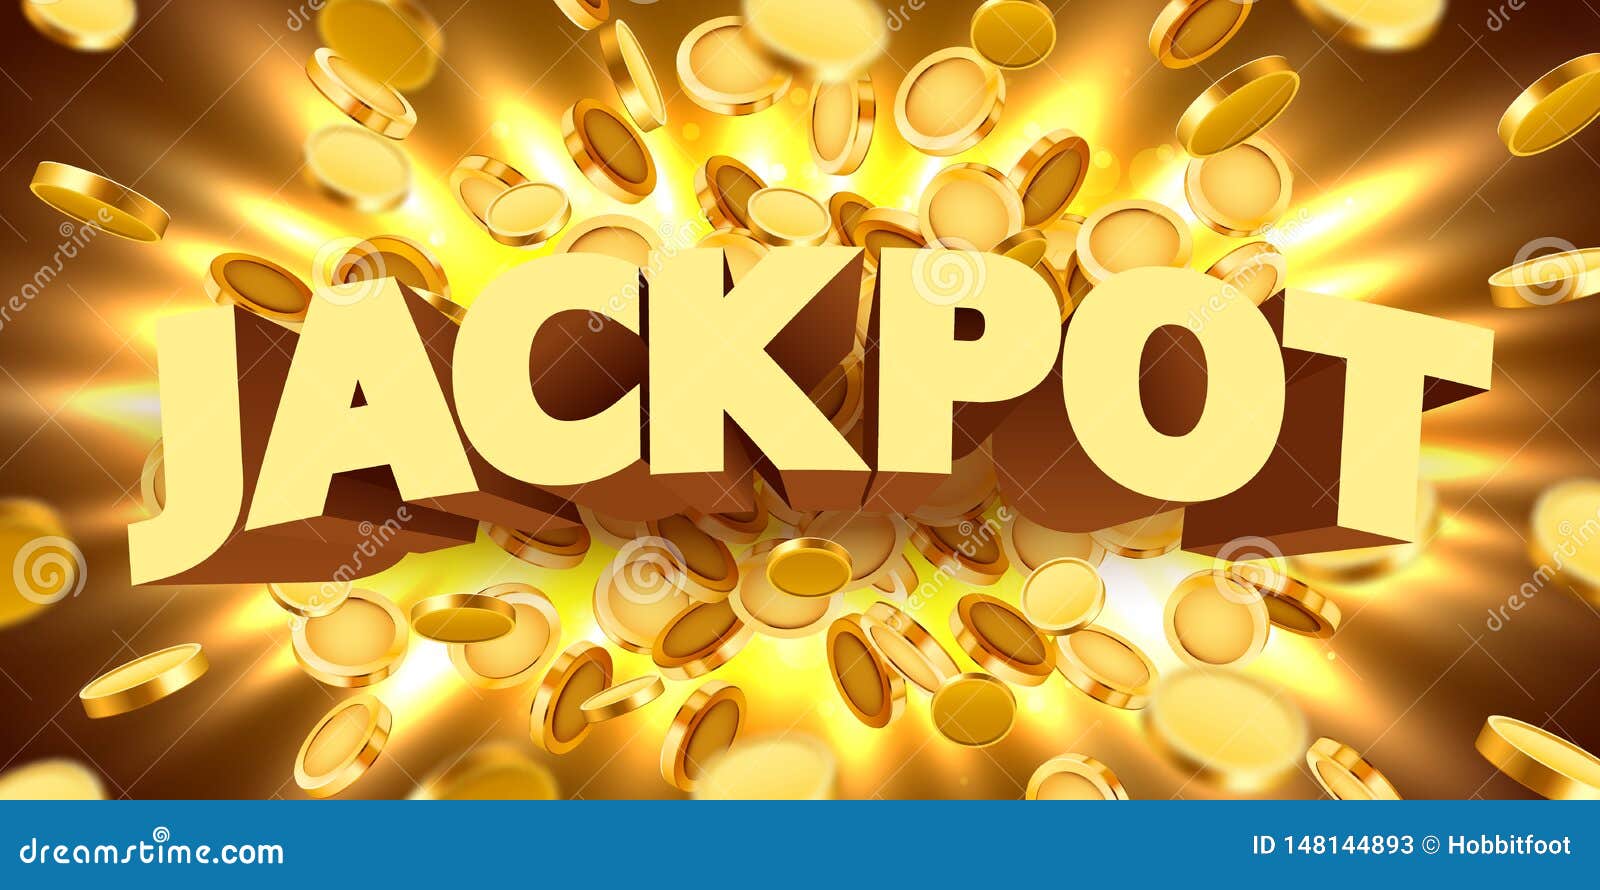 jackpot sign with gold realistic 3d coins background.